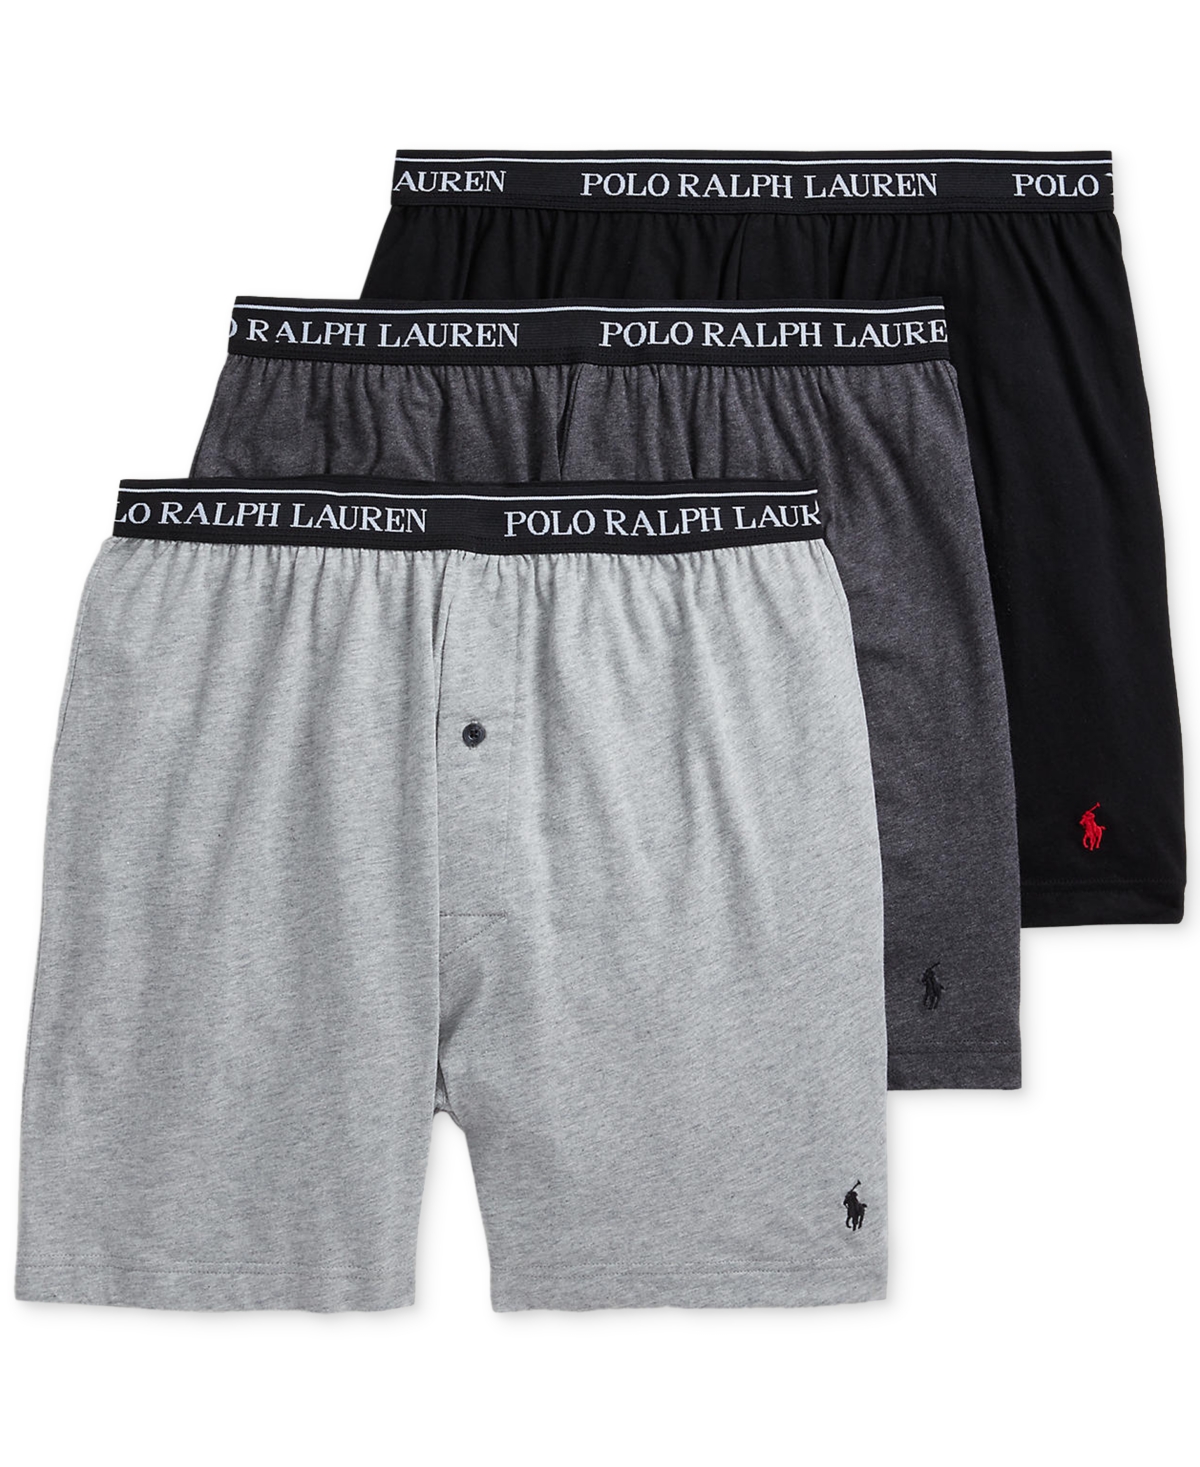 Polo Ralph Lauren Men's 3-pack. Cotton Classic Knit Boxers In Andover,madison,black